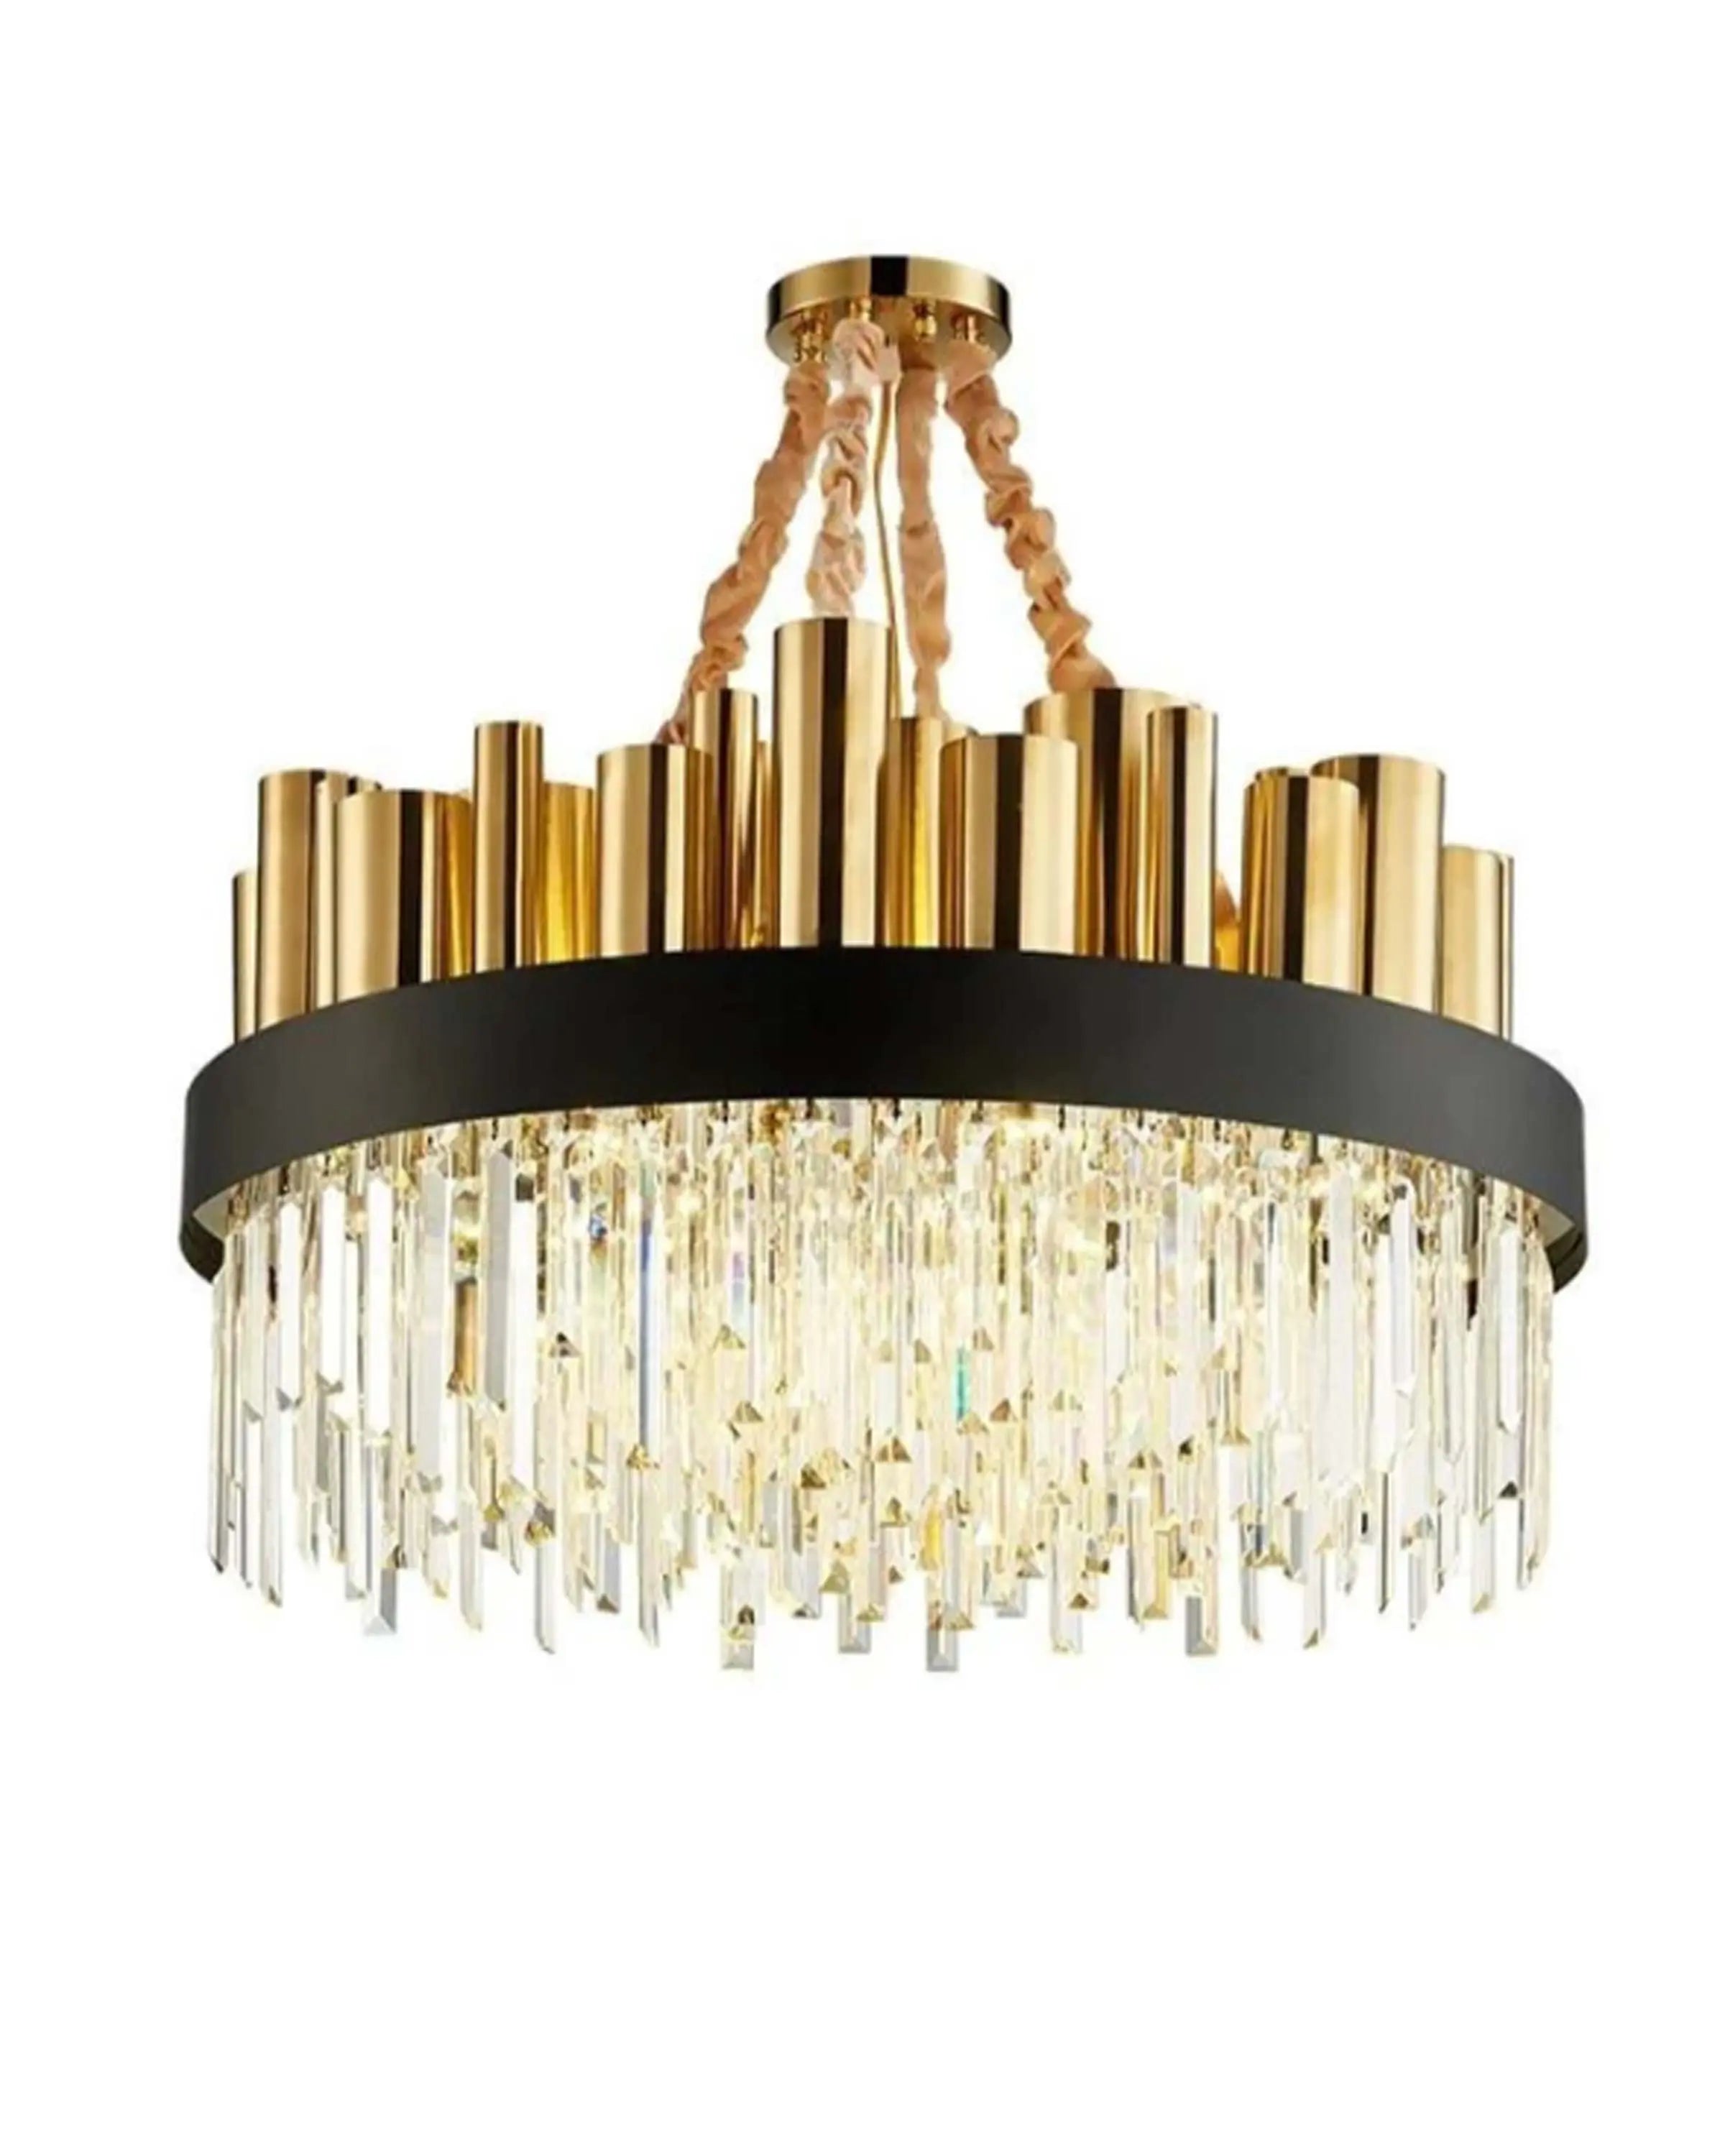 KILIMAN Classic Crystal Chandelier ANGIE HOMES